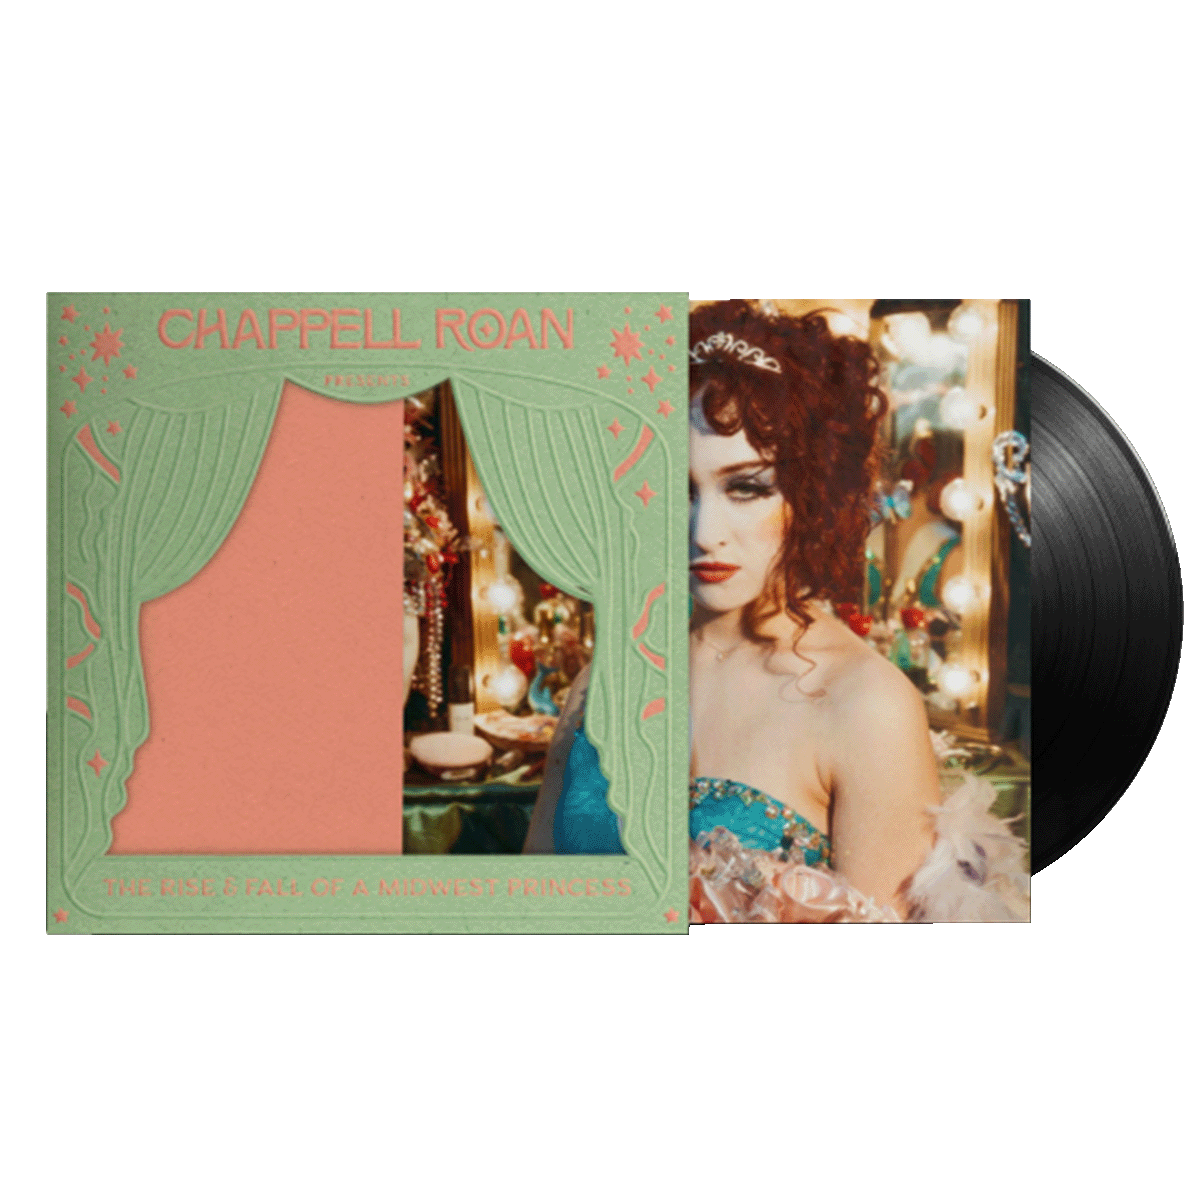 The Rise and Fall of a Midwest Princess EXCLUSIVE Vinyl (Deluxe LP)